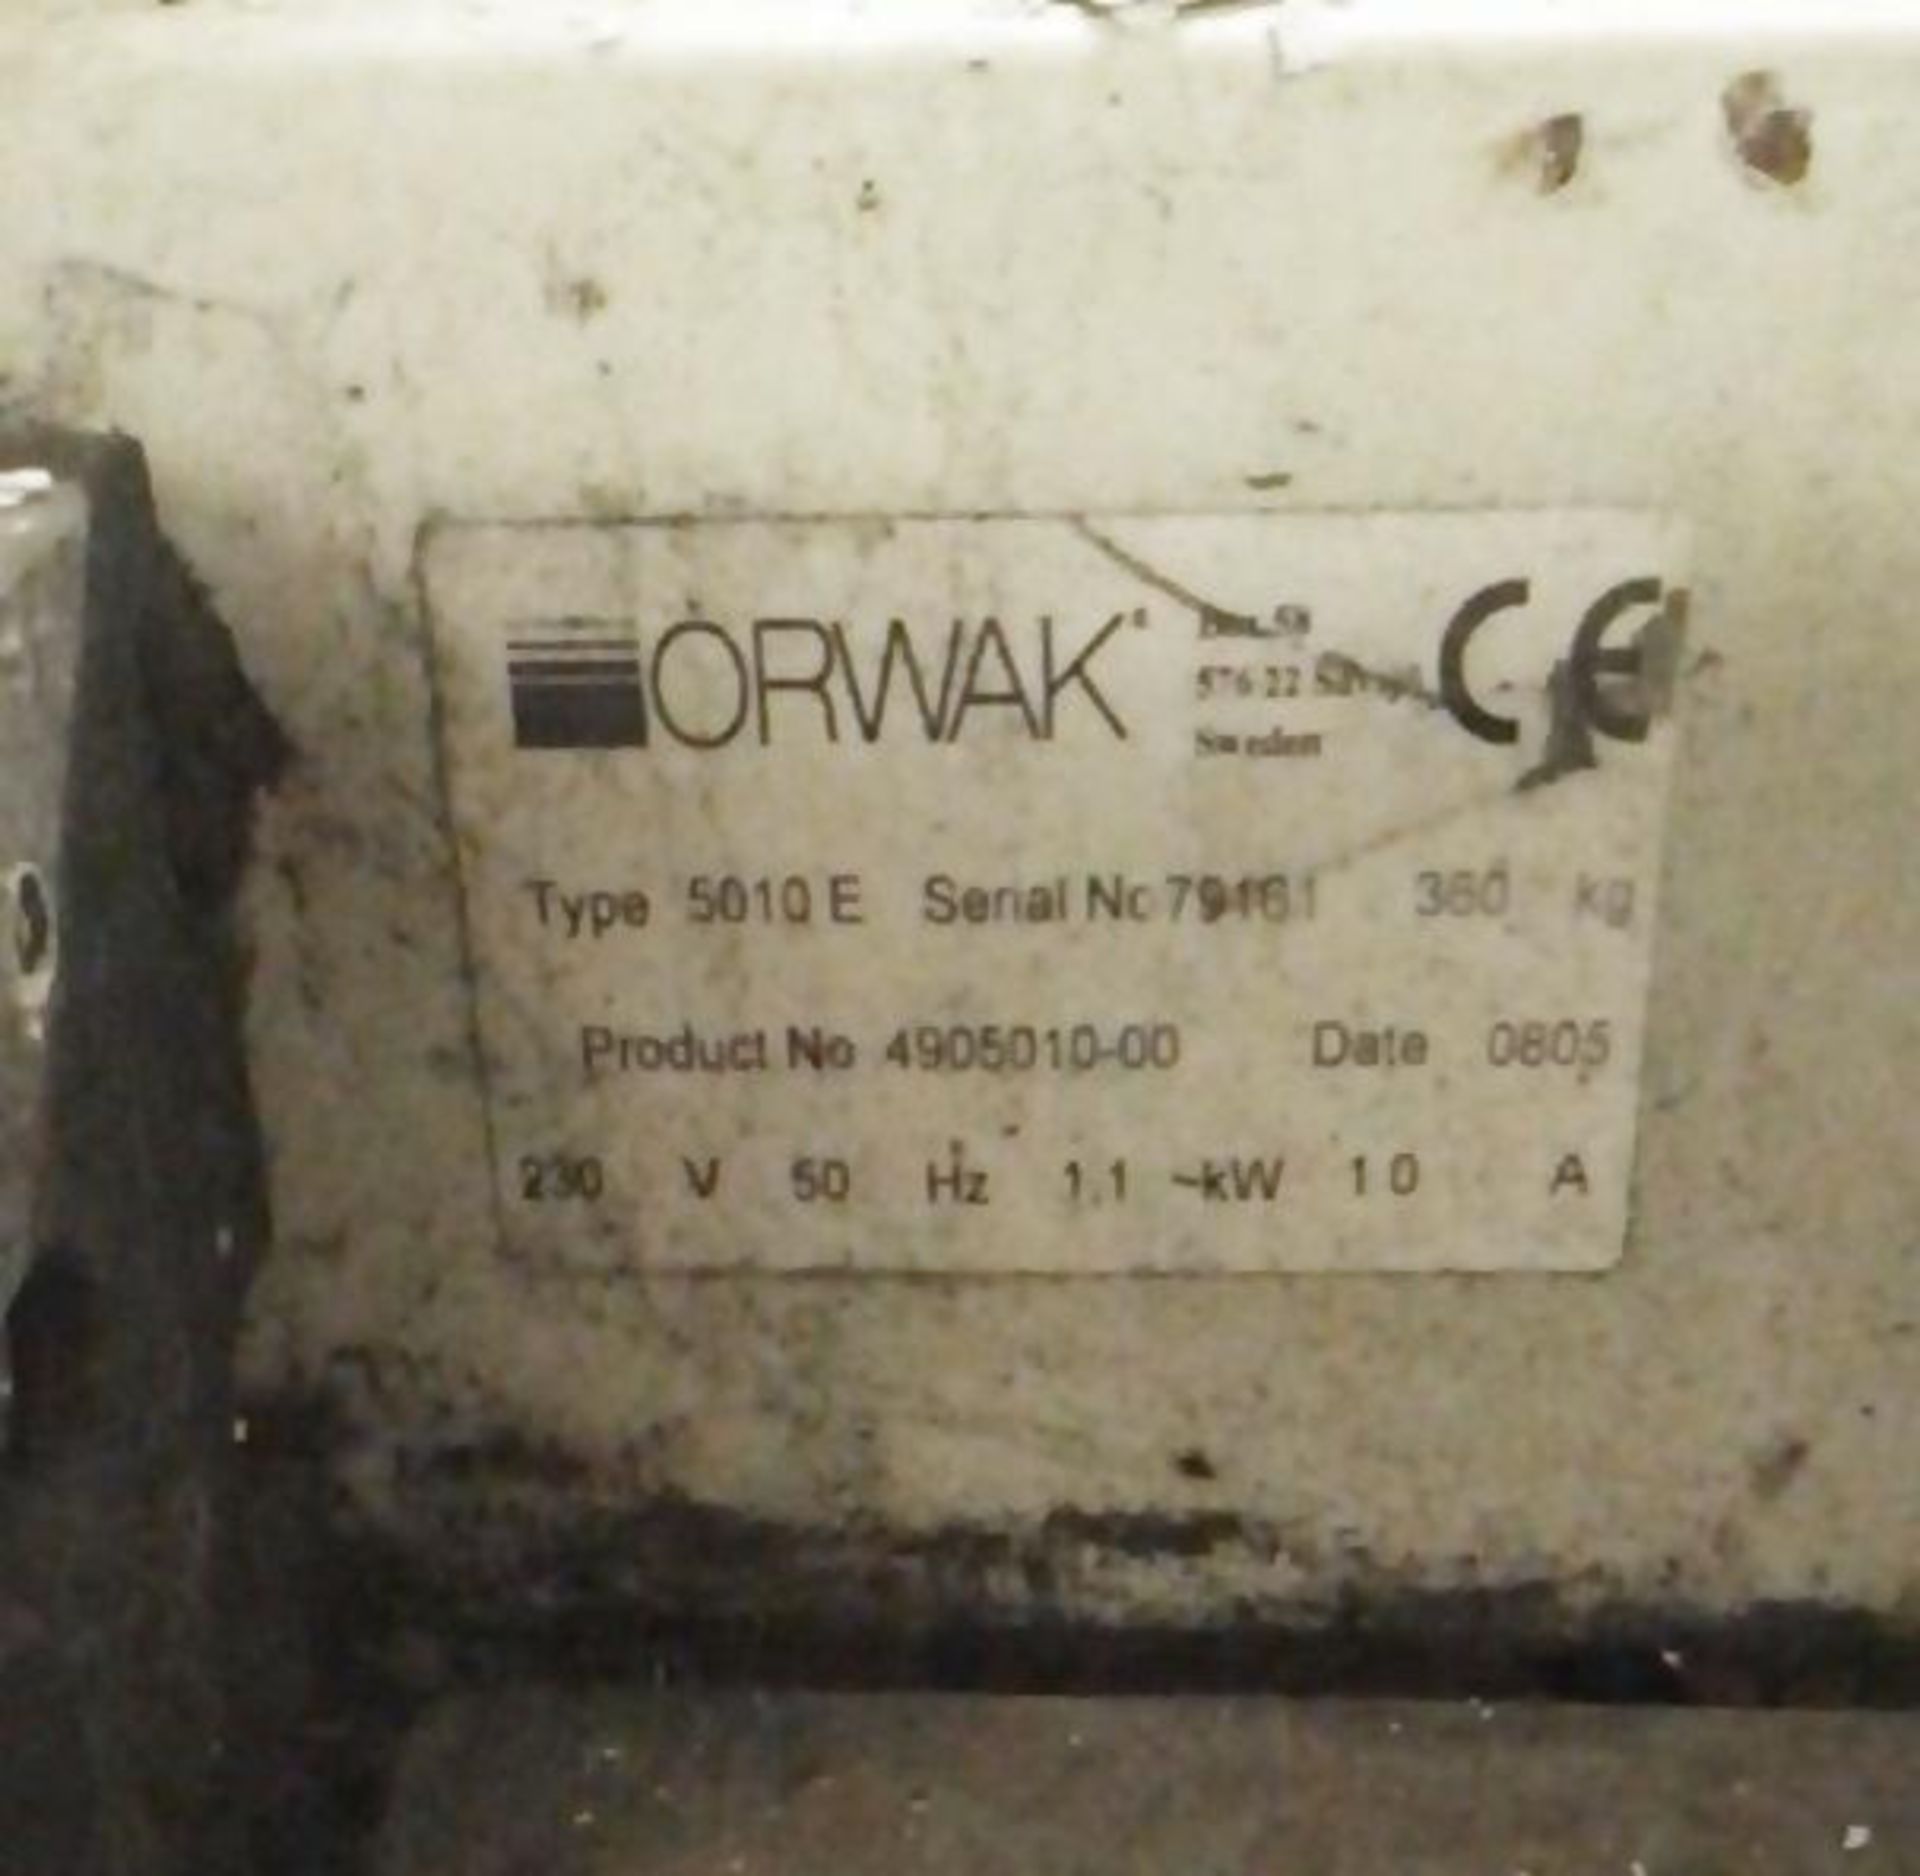 1 x Orwak 5010 Top Loading Baler -  Fully Tested and Working, Very Good Condition - CL011 - Location - Image 2 of 5